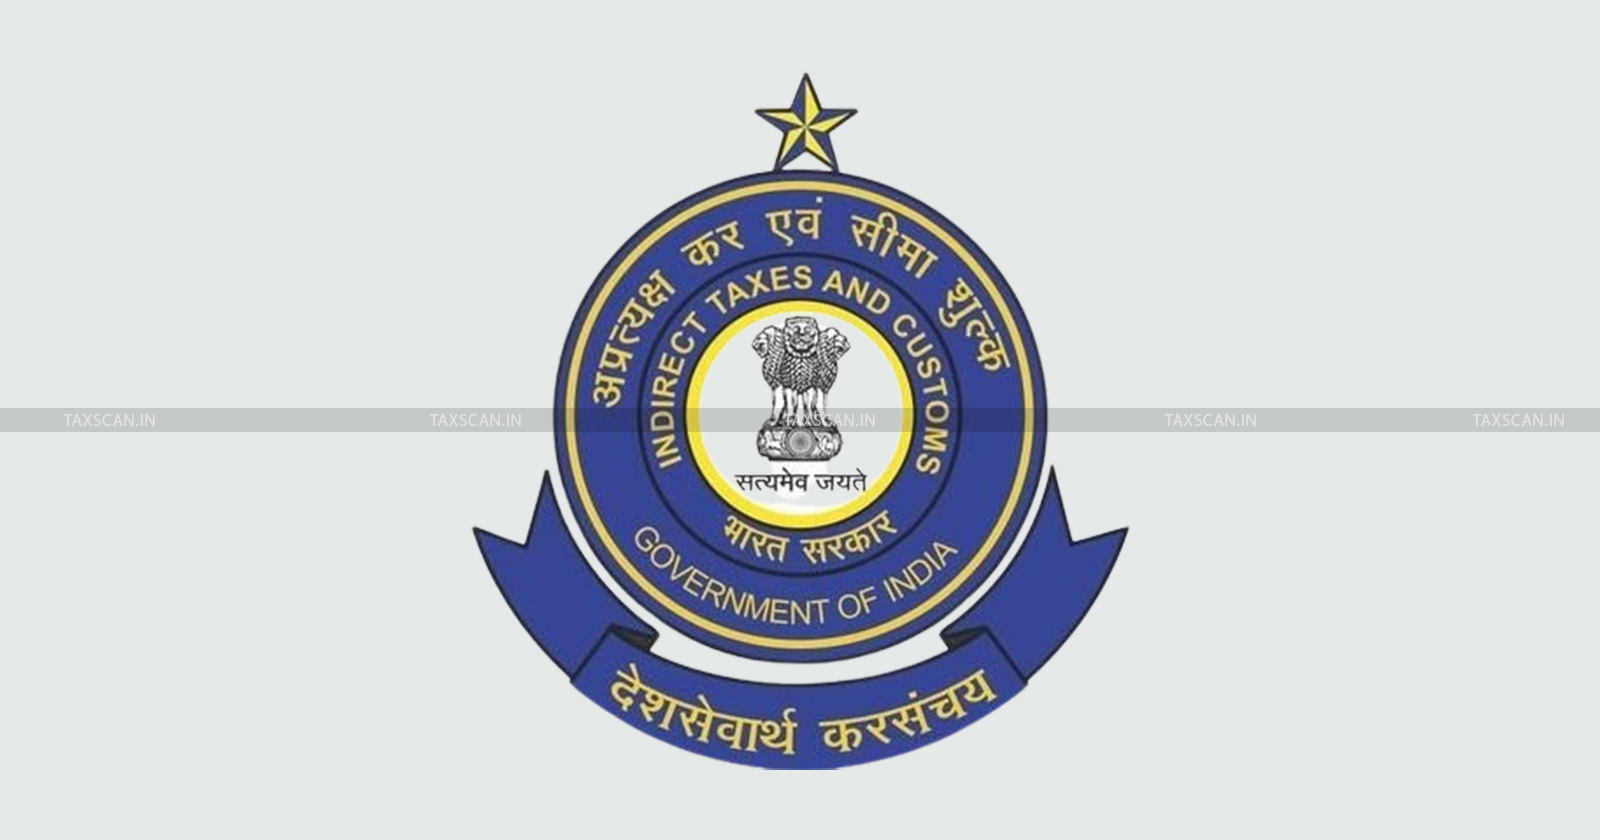 CGST - Mumbai West Commissionerate of CGST - Central excise new address - Central Excise Relocated - Mumbai west commissionerate of CGST new address - CGST and Central excise office address change - TAXSCAN